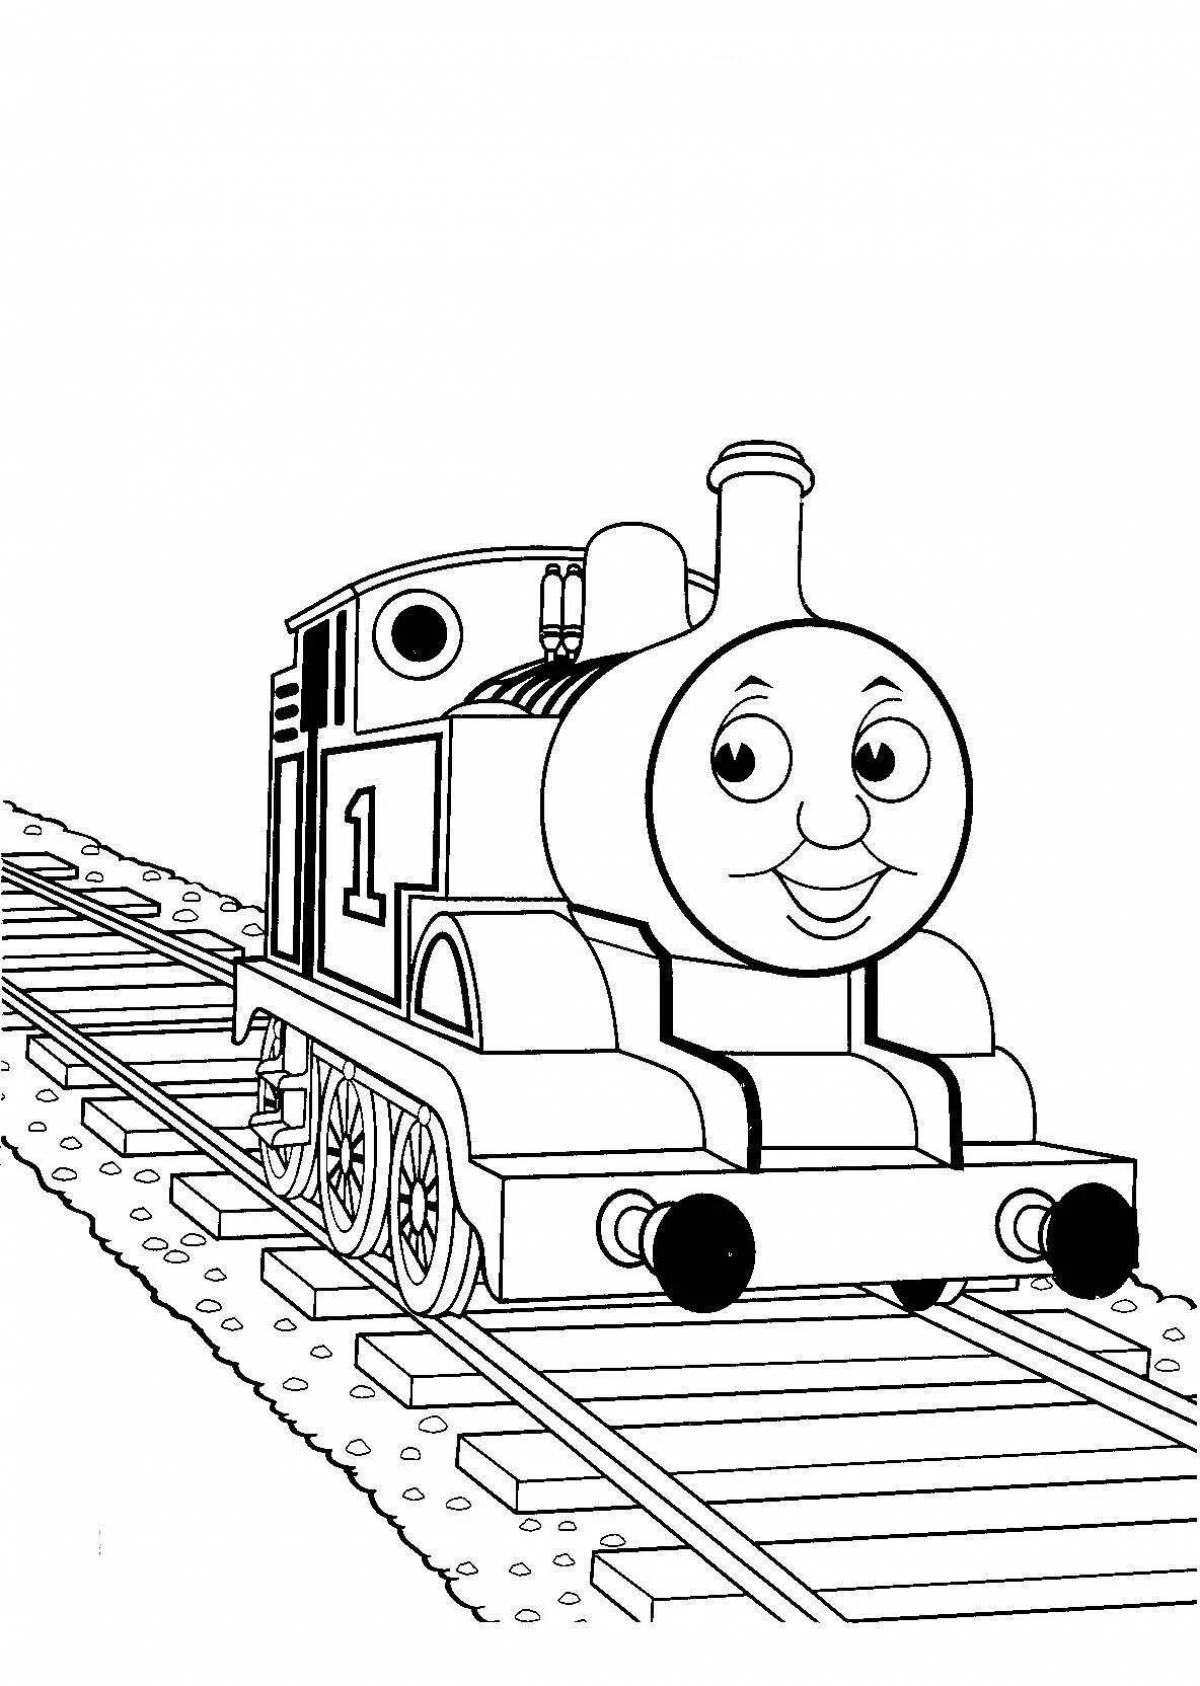 Bright thomas coloring for kids